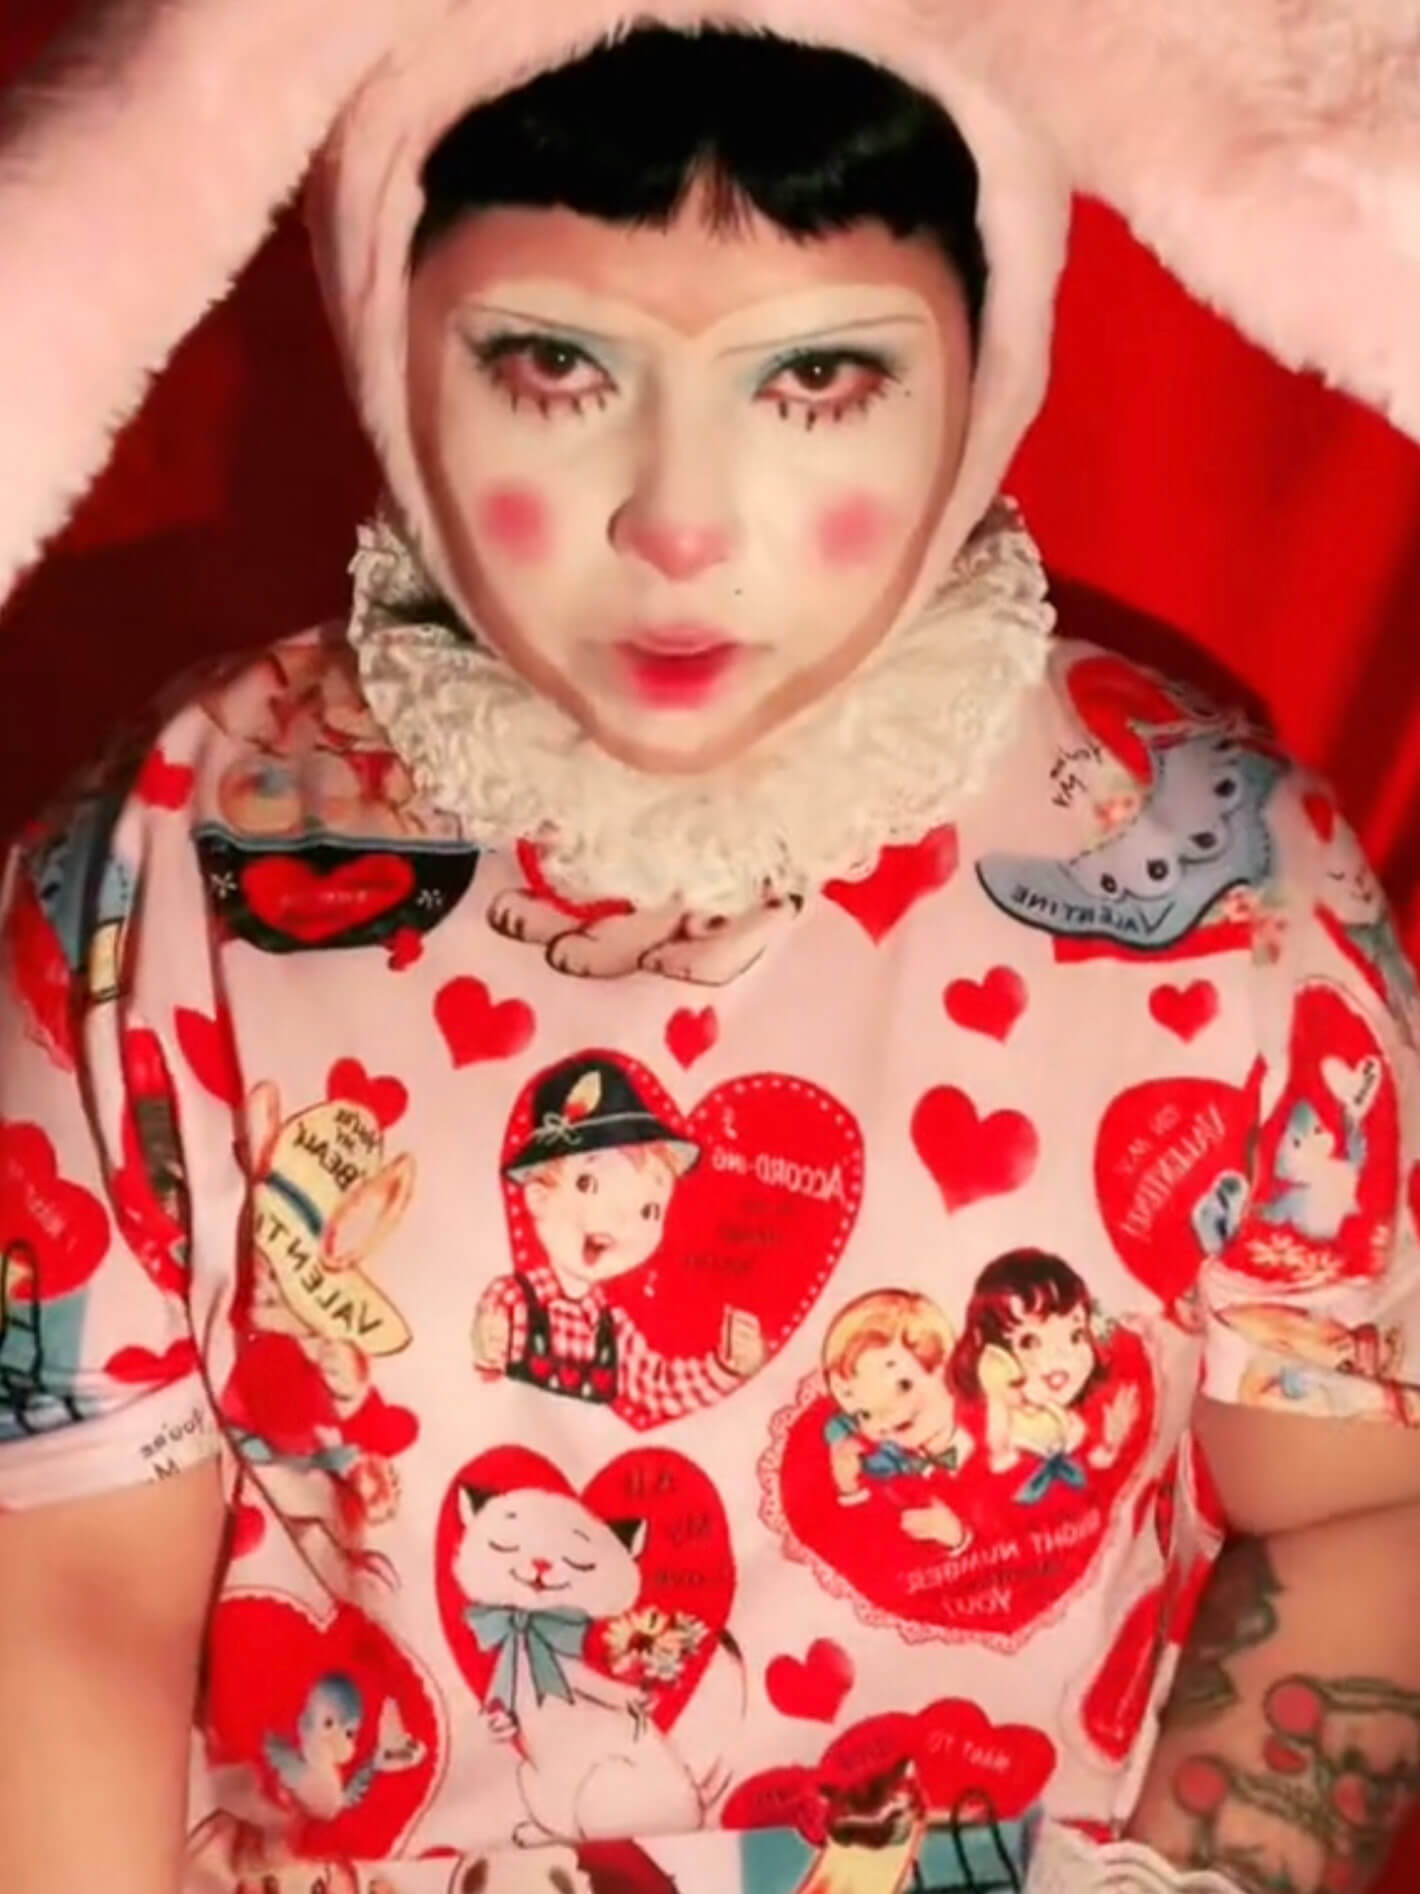 Livingdeaddoll wearing our limited edition kitschy valentine t-shirt dress.